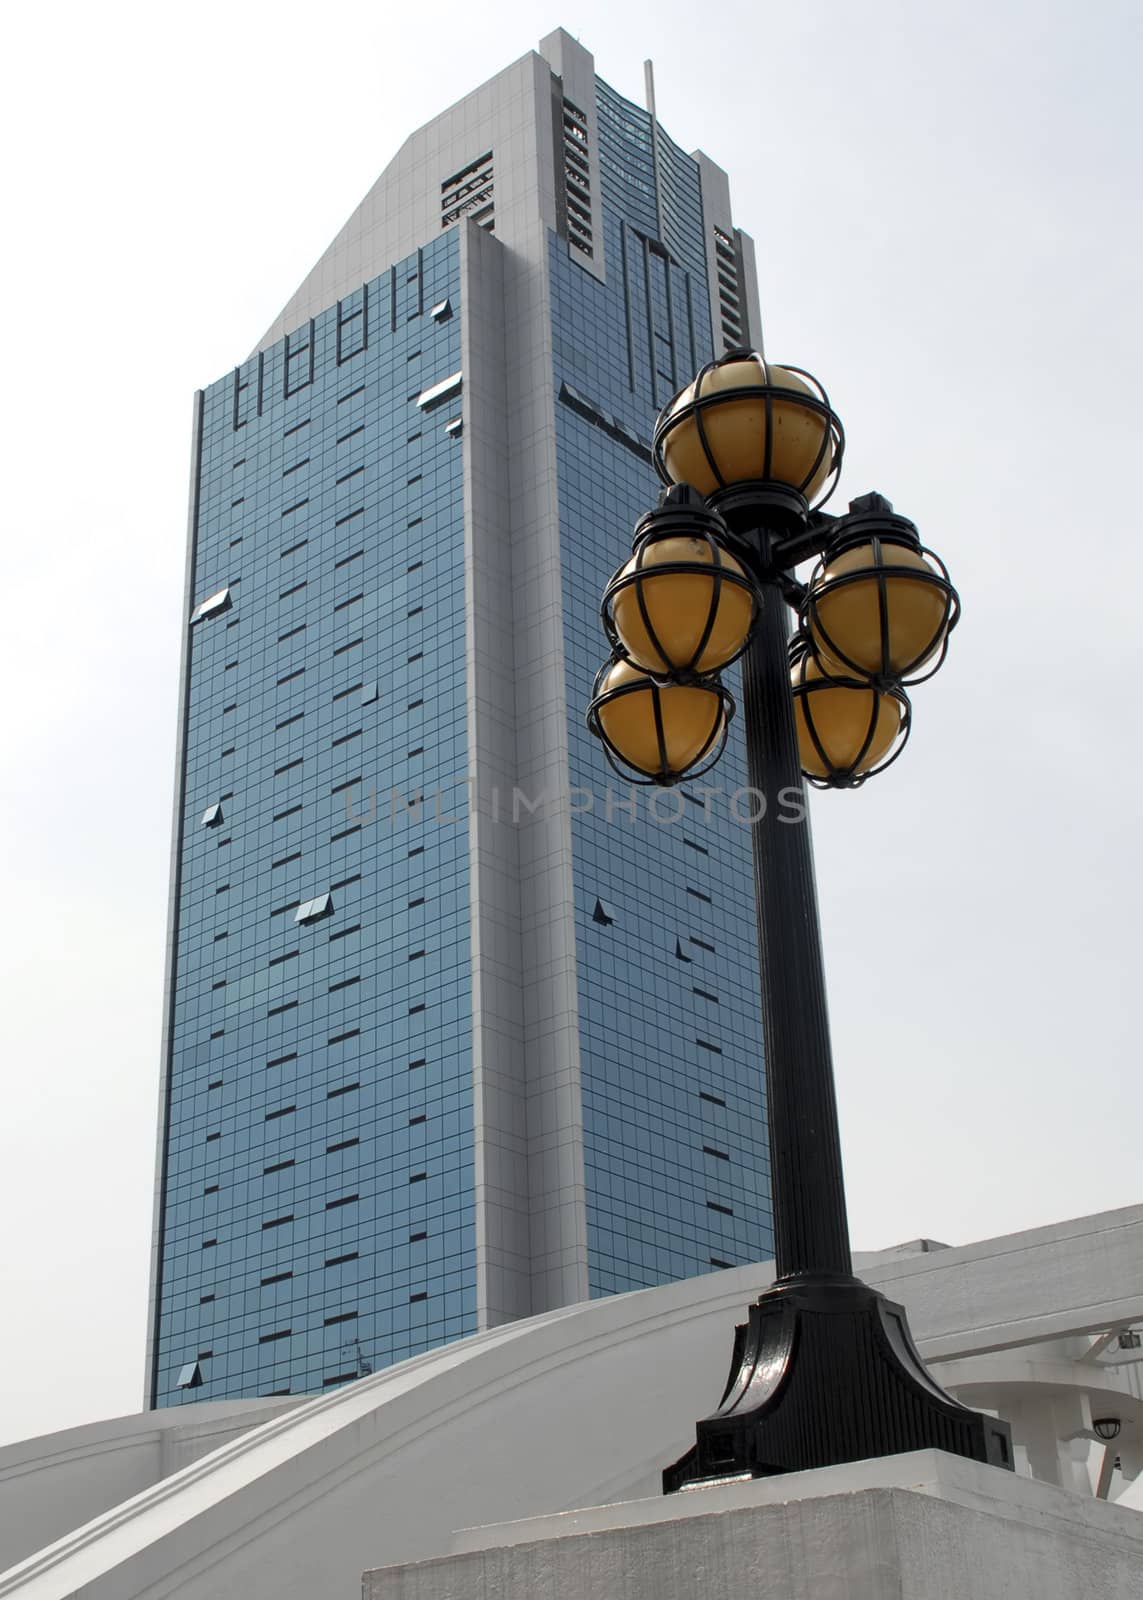 A modern business building is contrasted against a victorian era lamppost